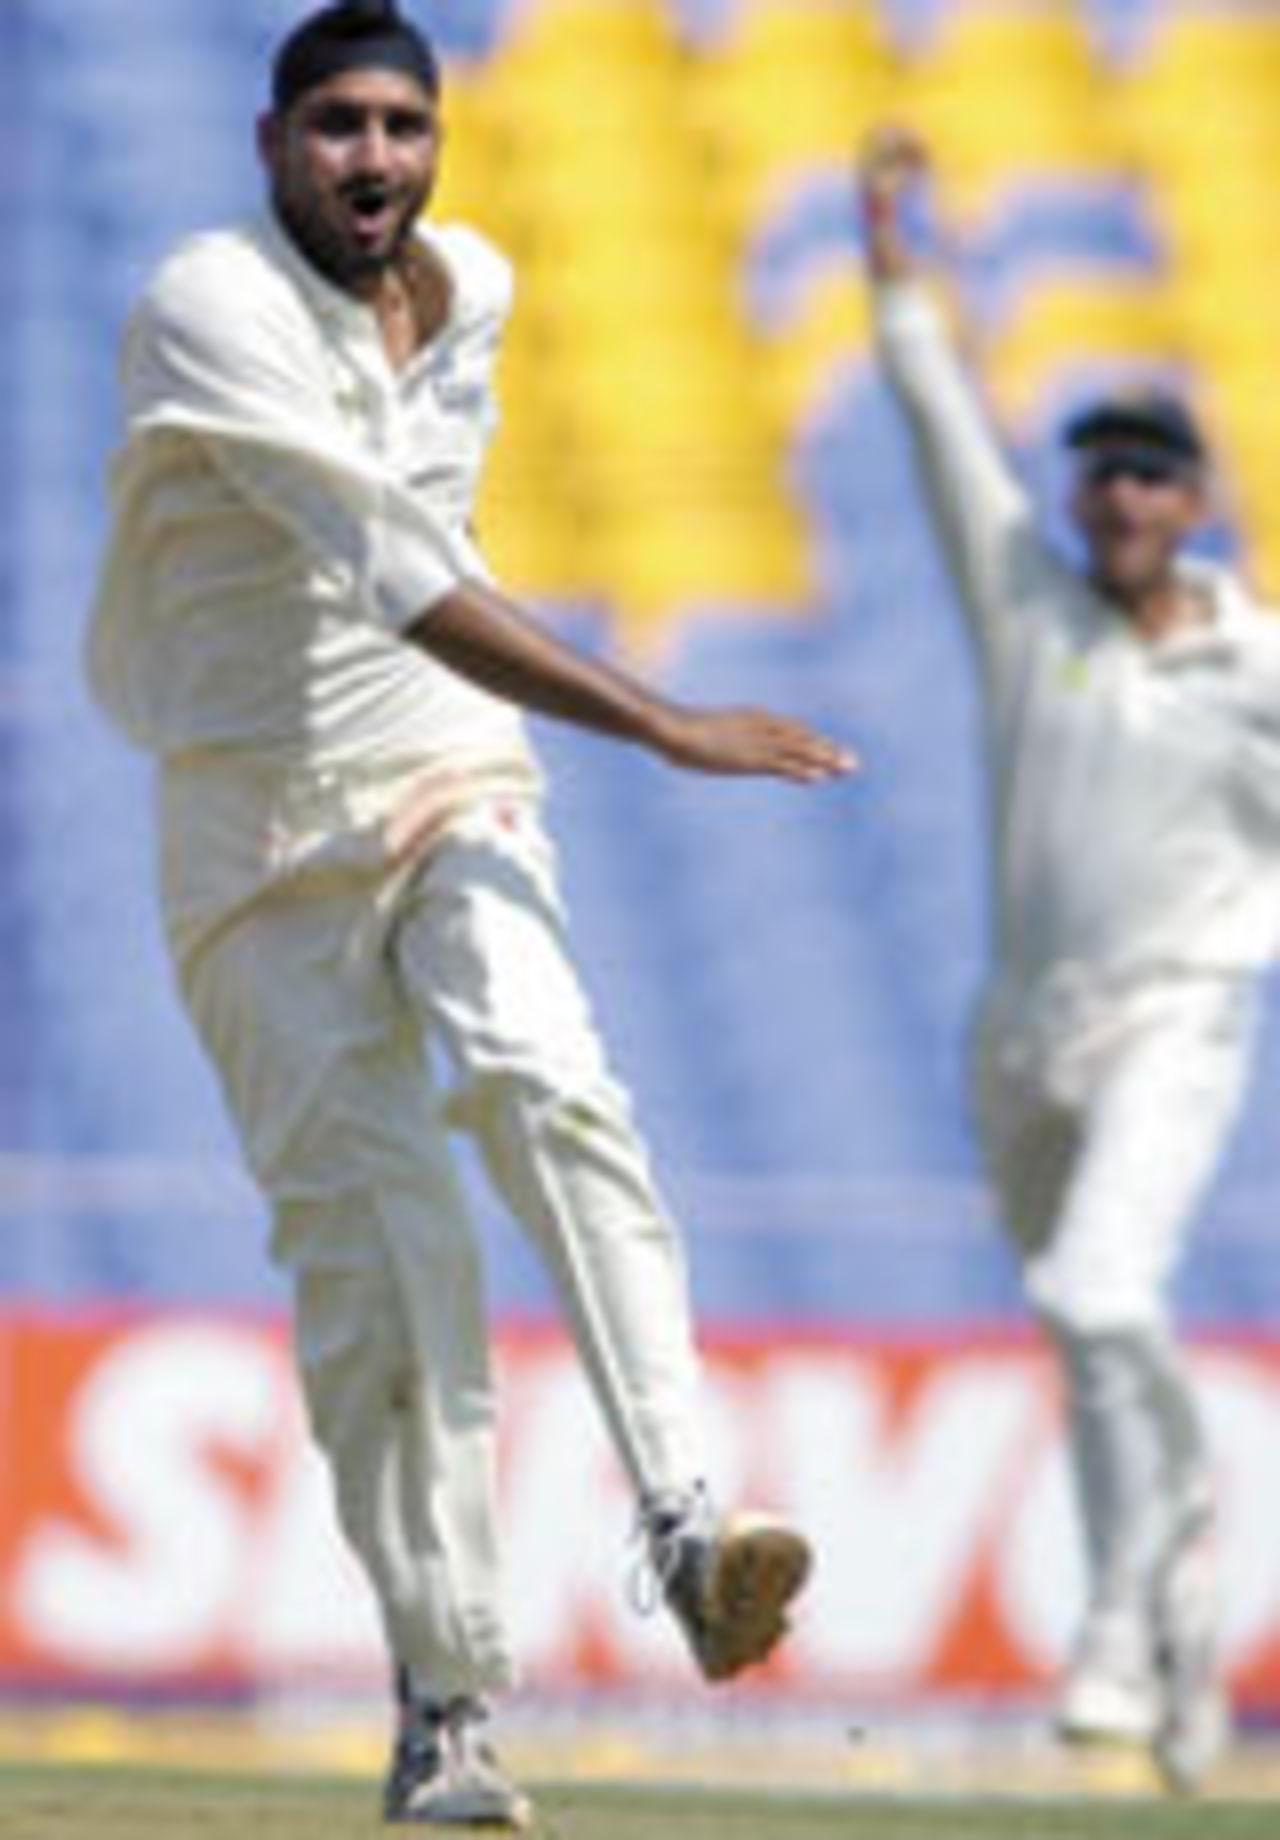 Harbhajan Singh celebrates after dismissing Scott Styris in New Zealand's first innings, India v New Zealand, 1st Test, Ahmedabad, 3rd Day, October 10, 2003